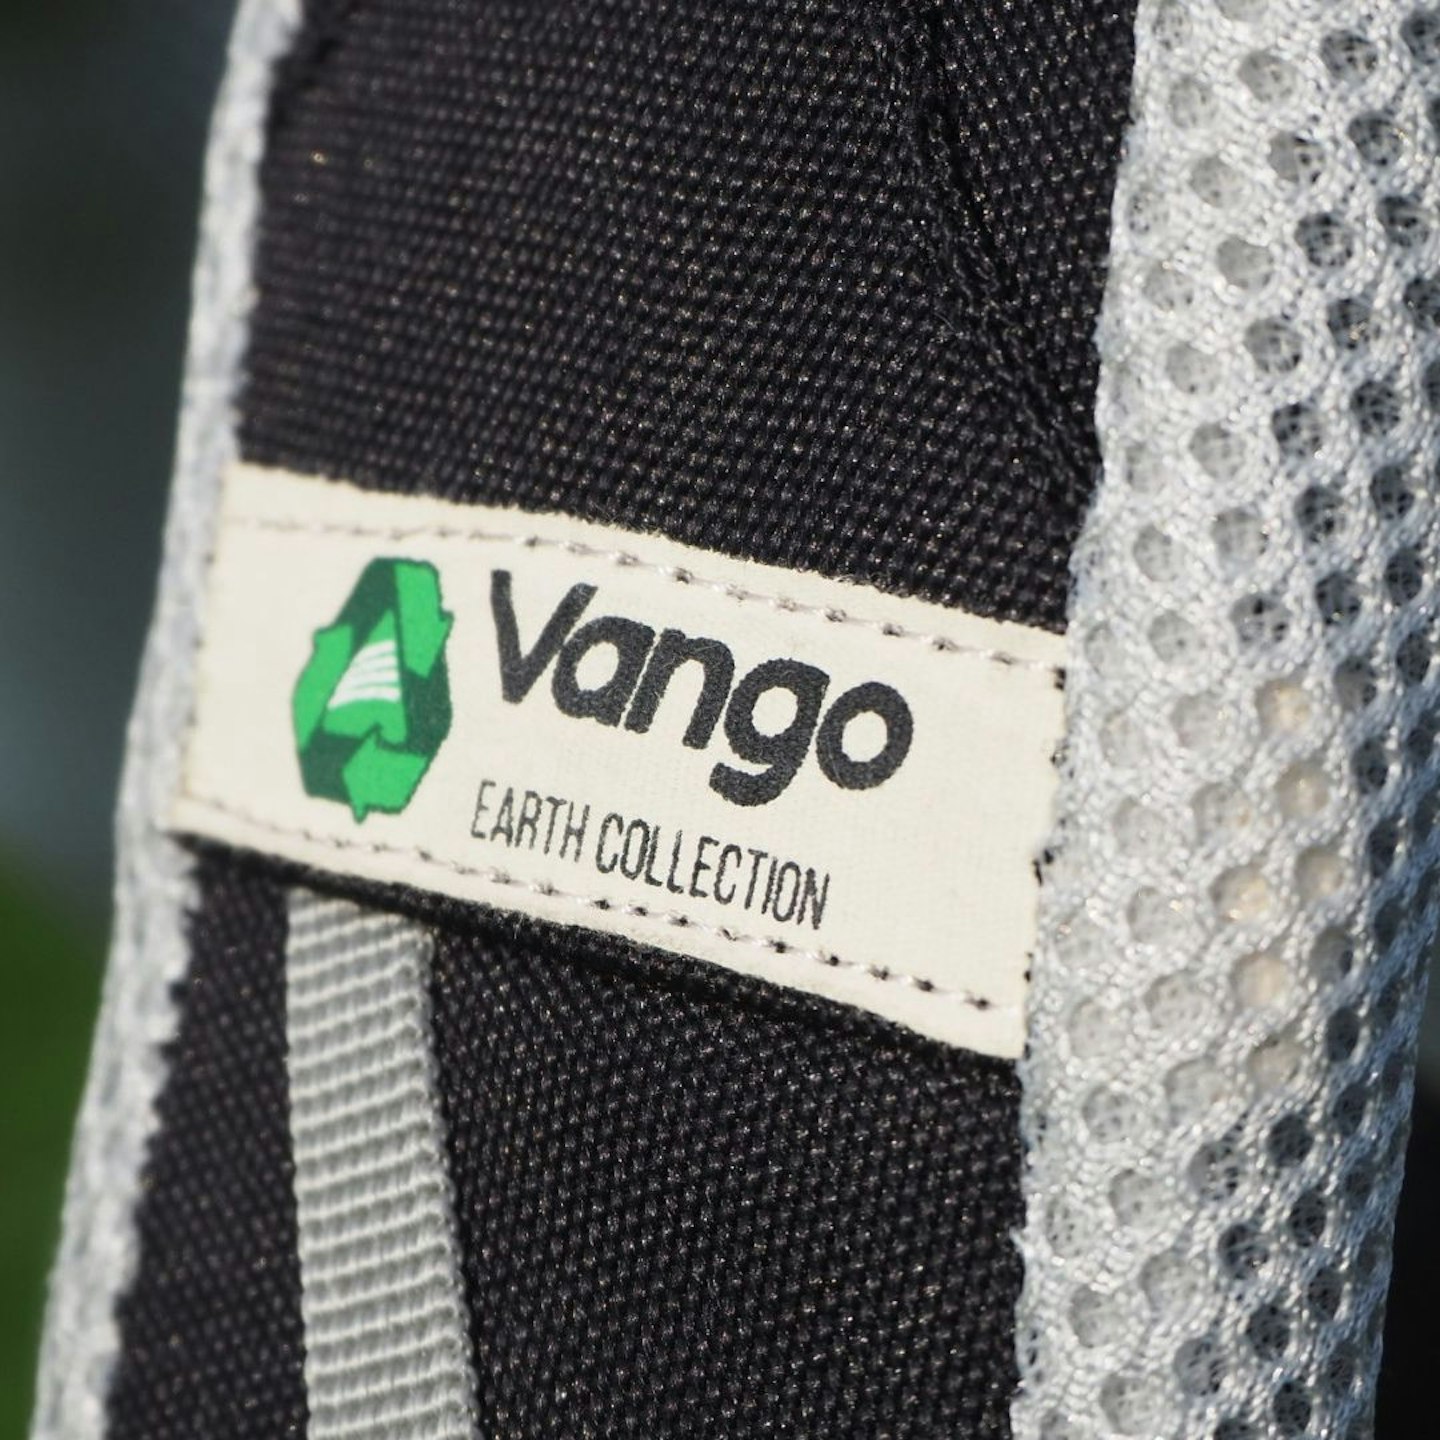 Vango Sherpa 60:70 Earth Collection label